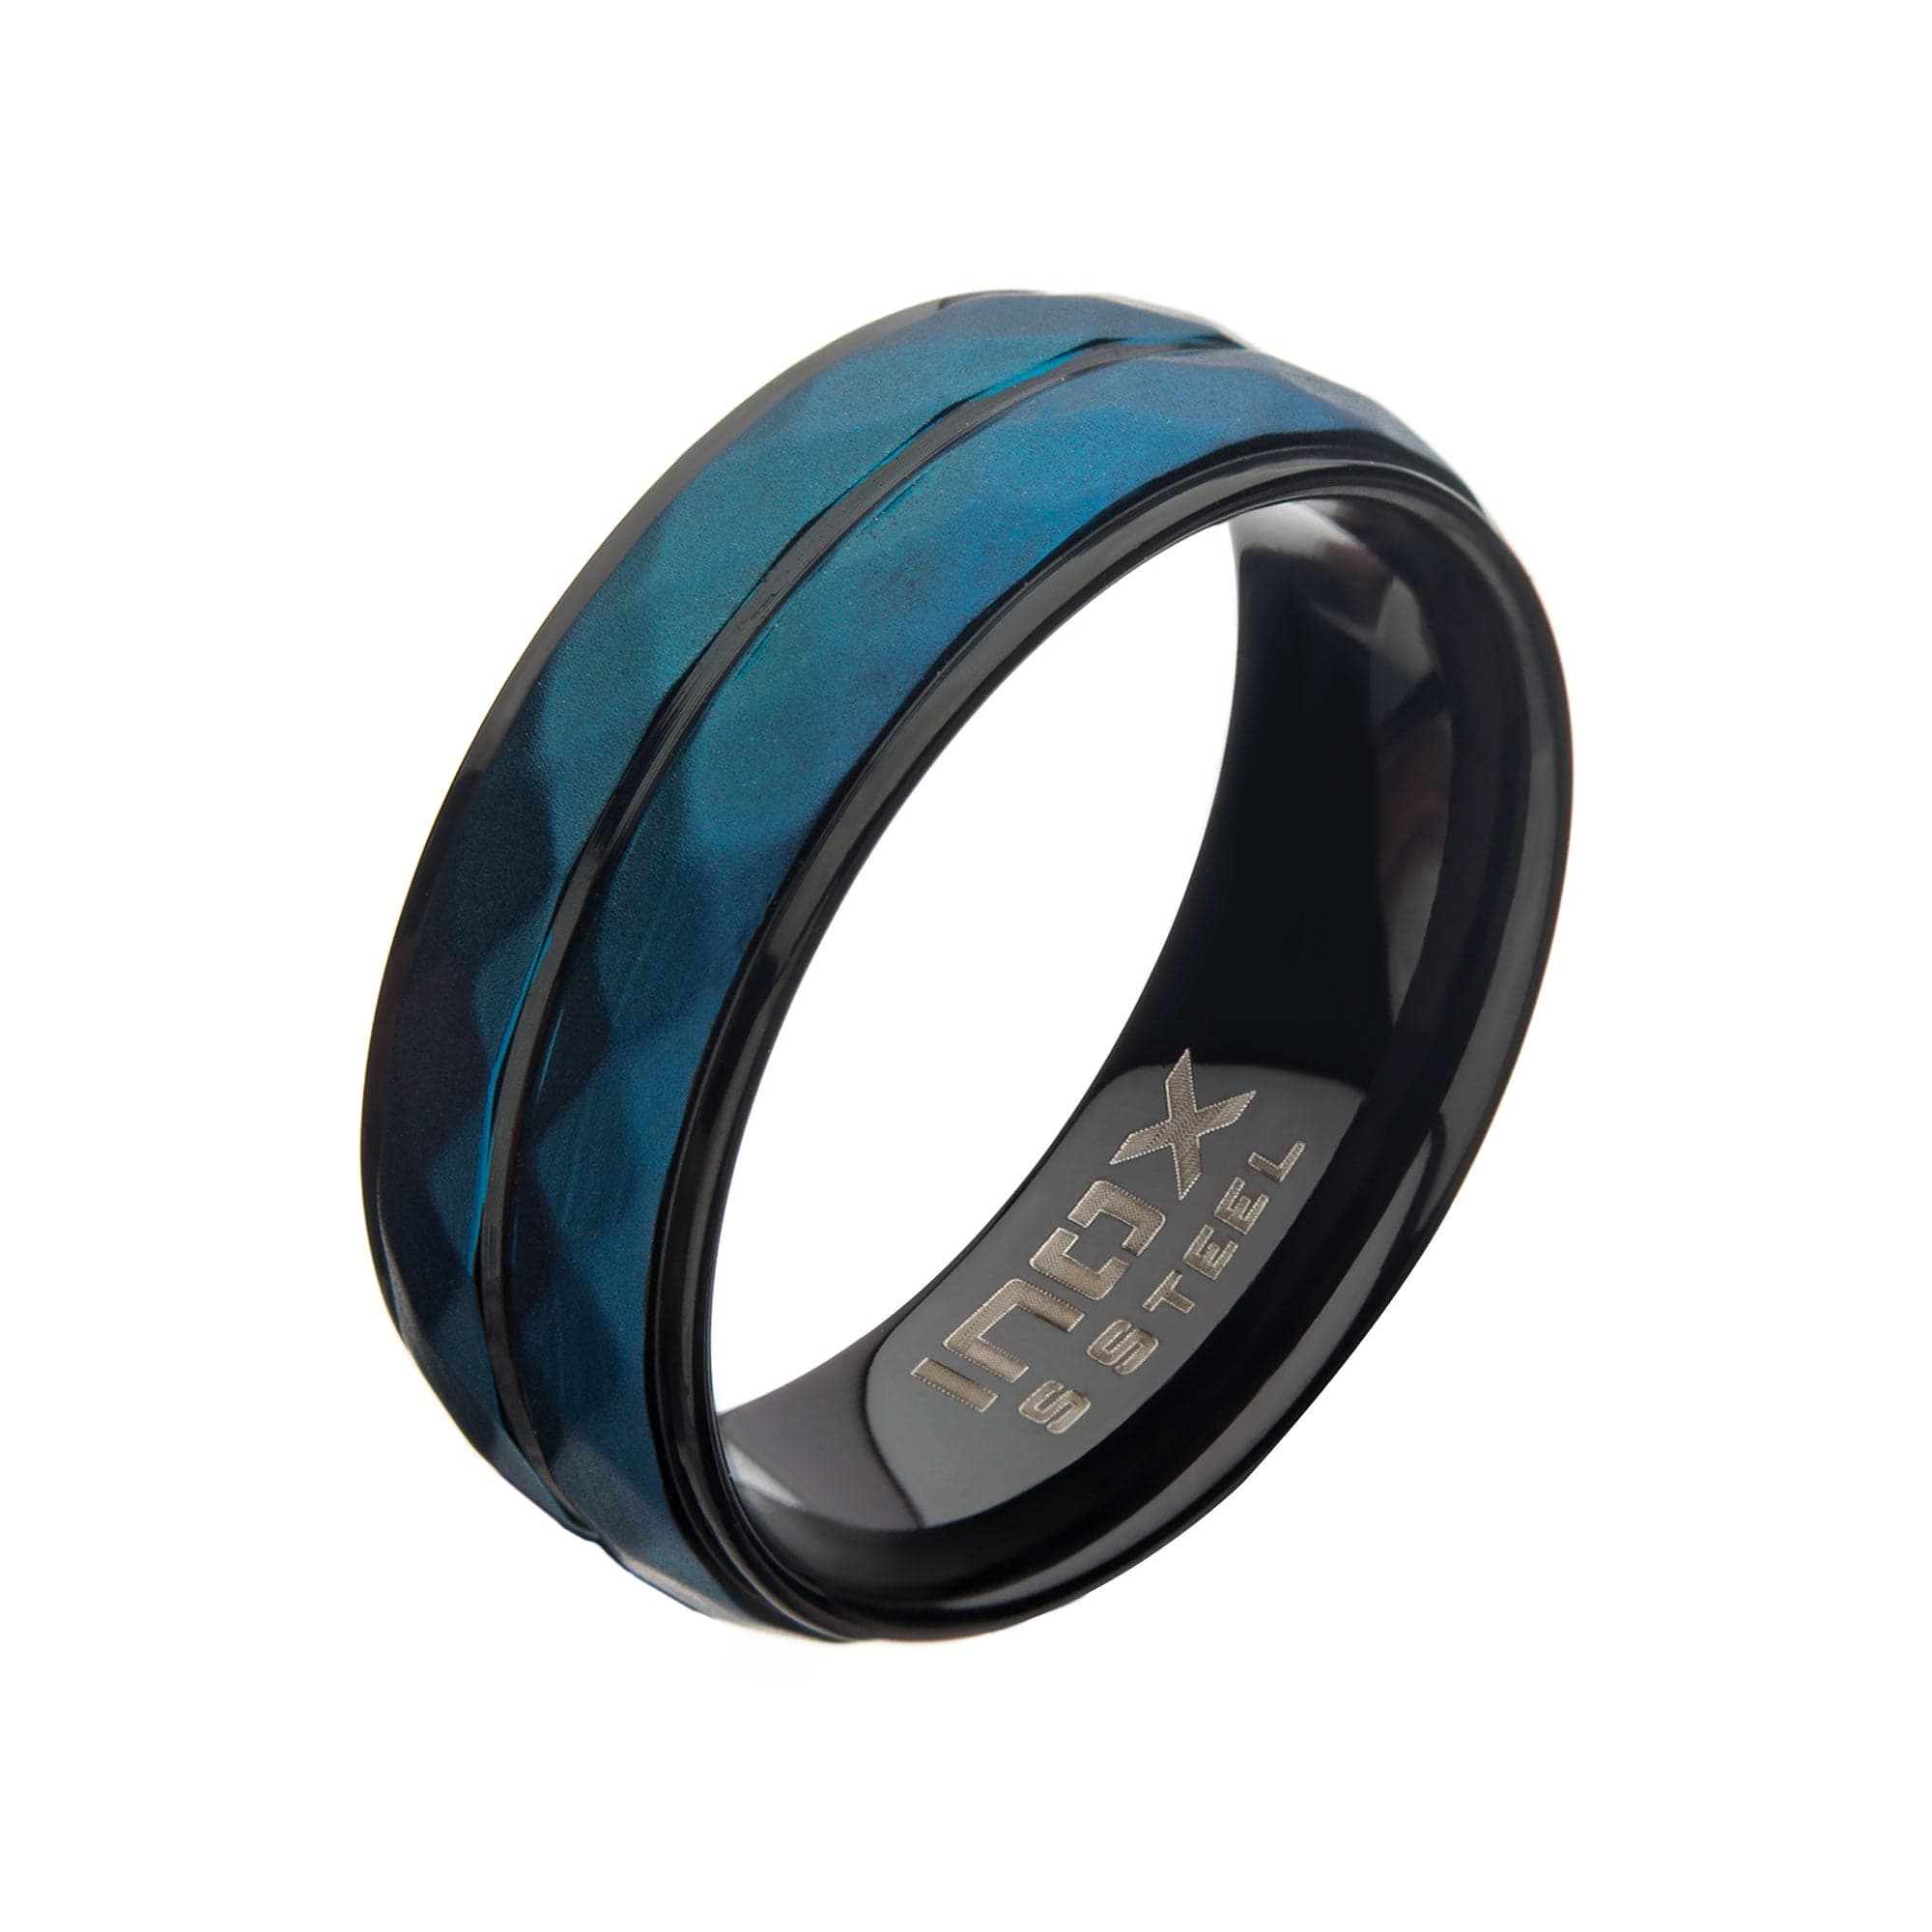 INOX JEWELRY Rings Black and Blue Stainless Steel Matte Finish Hammered Band Ring